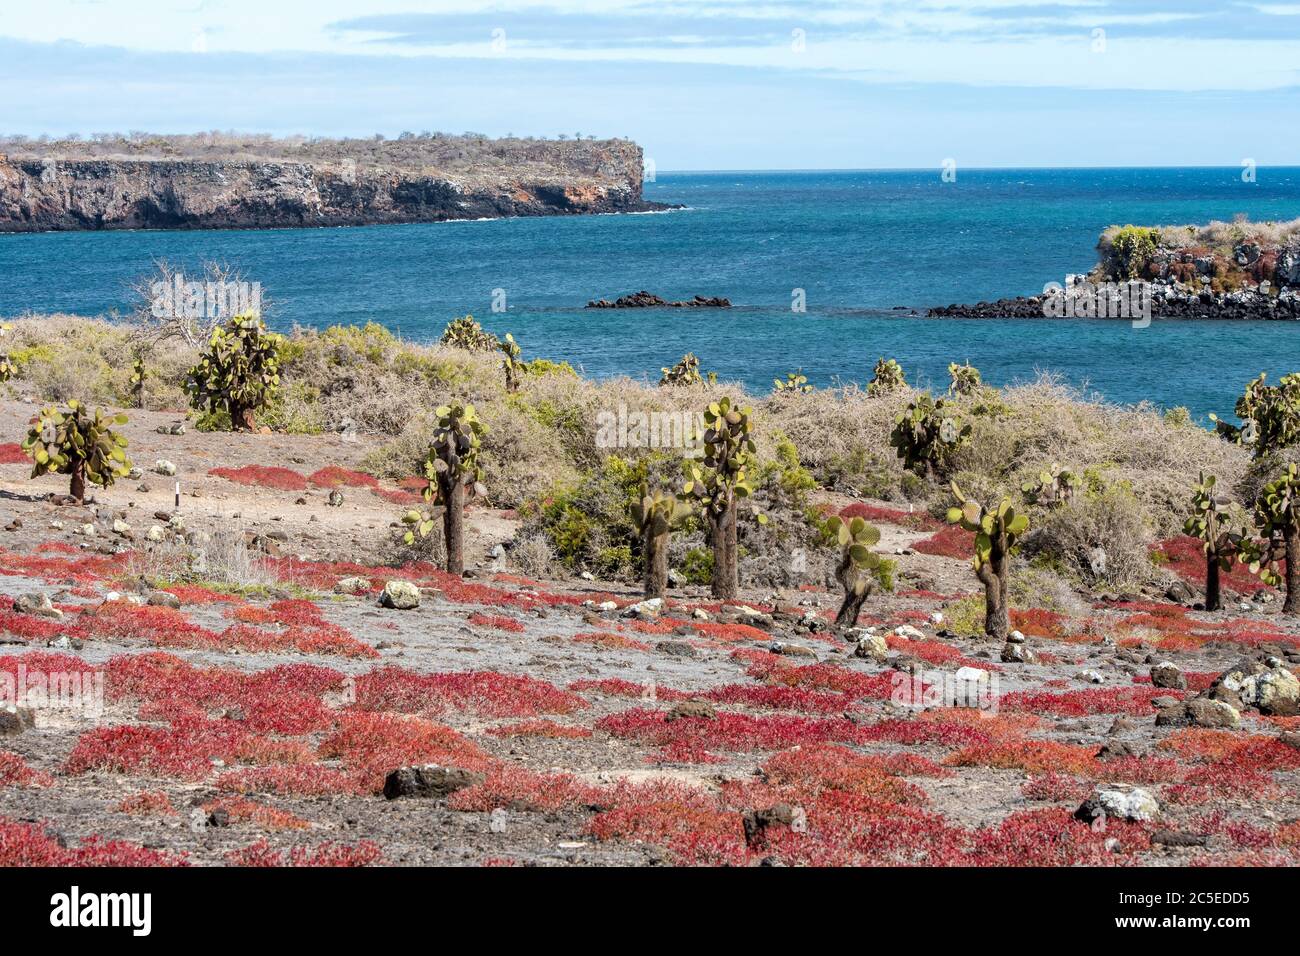 Tall cacti grow among the rocks covered by red sesuvium plants at South Plaza Island Stock Photo